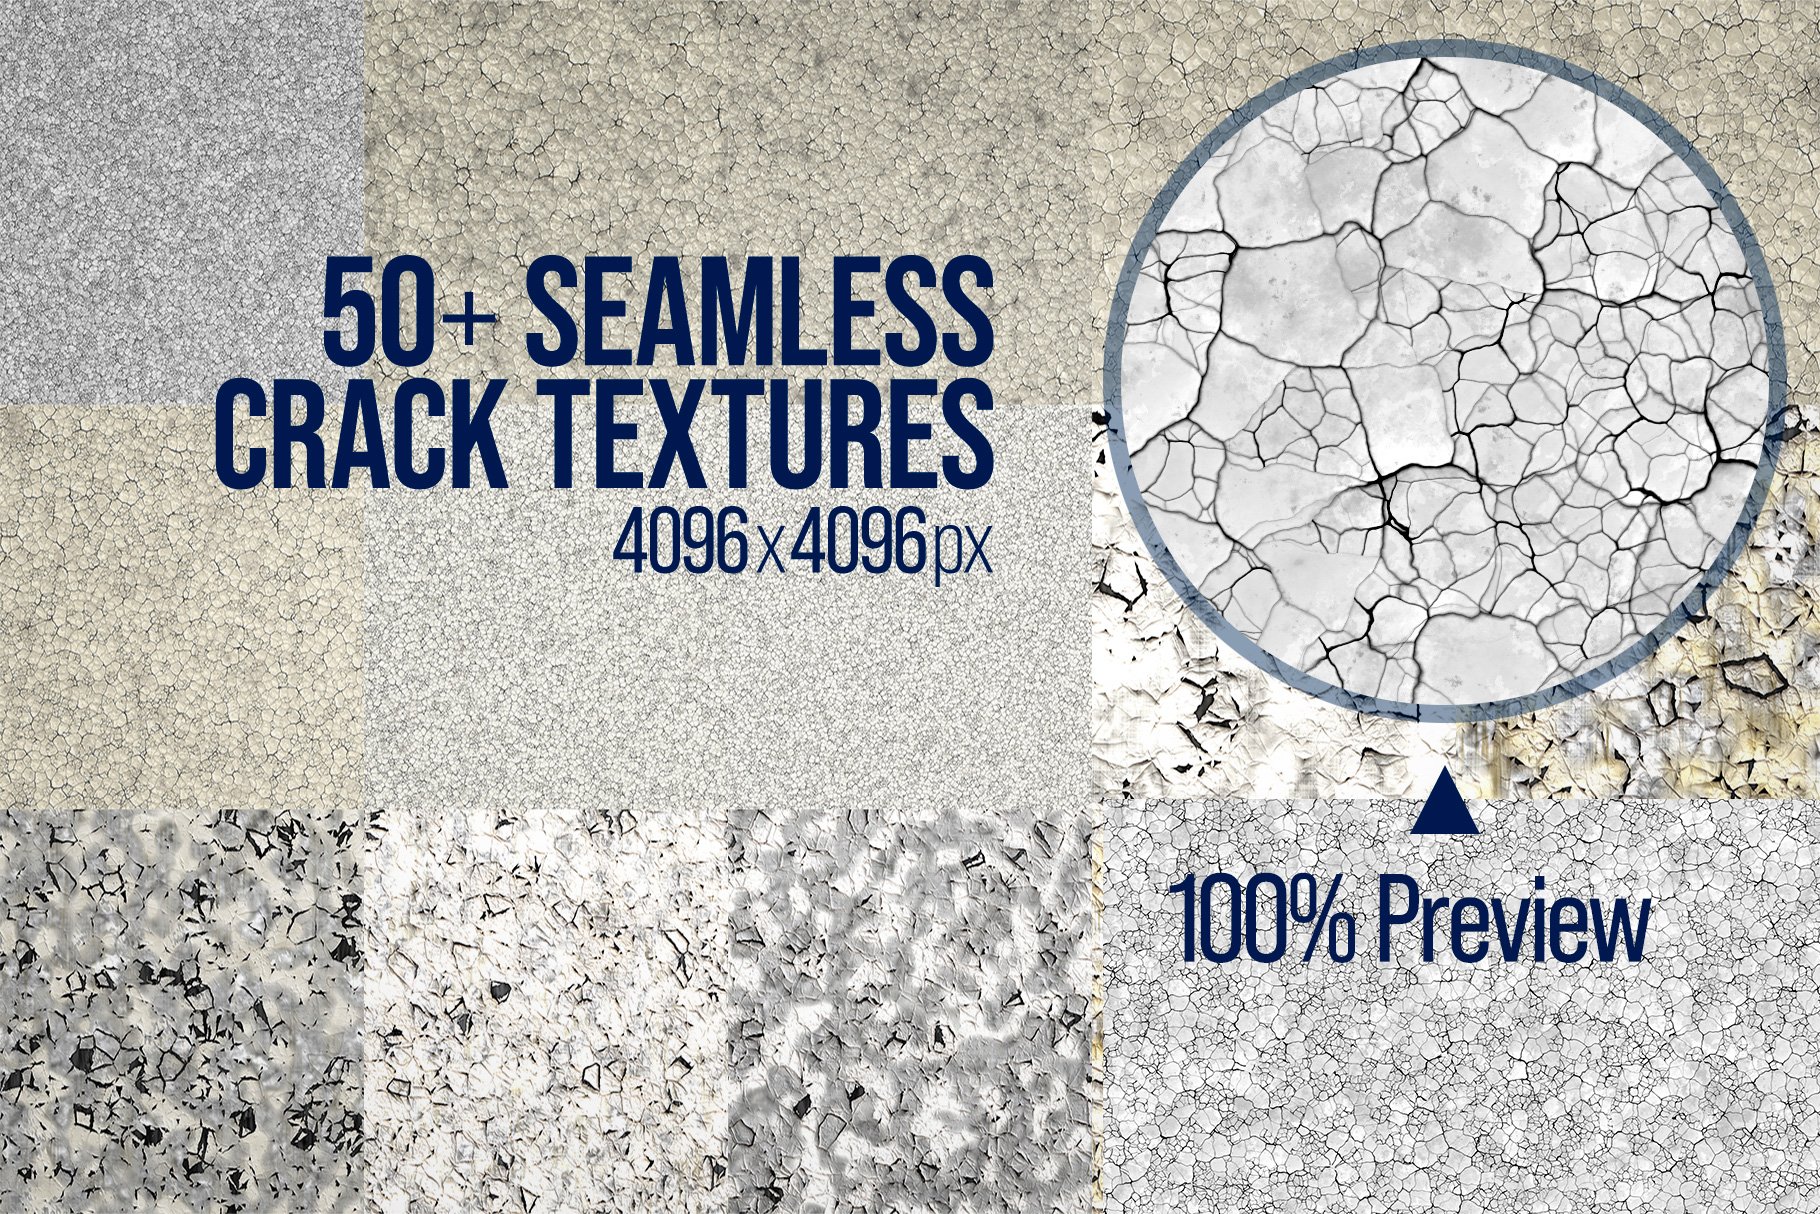 50+ Seamless Crack Textures preview image.